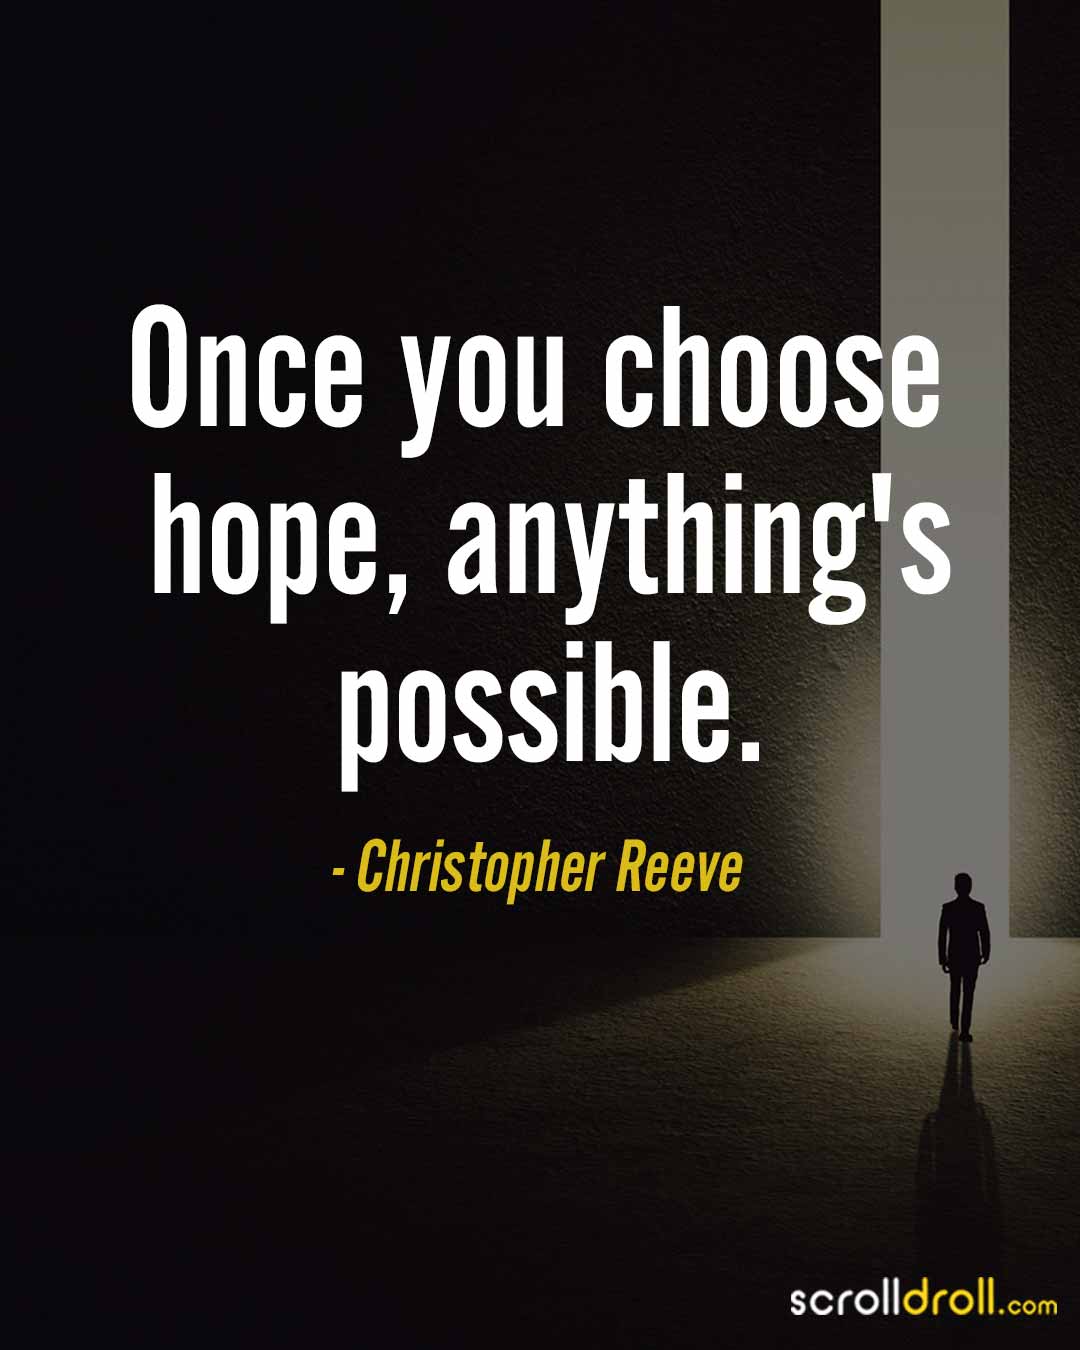 15 Quotes About Hope That'll Help You Move Ahead!